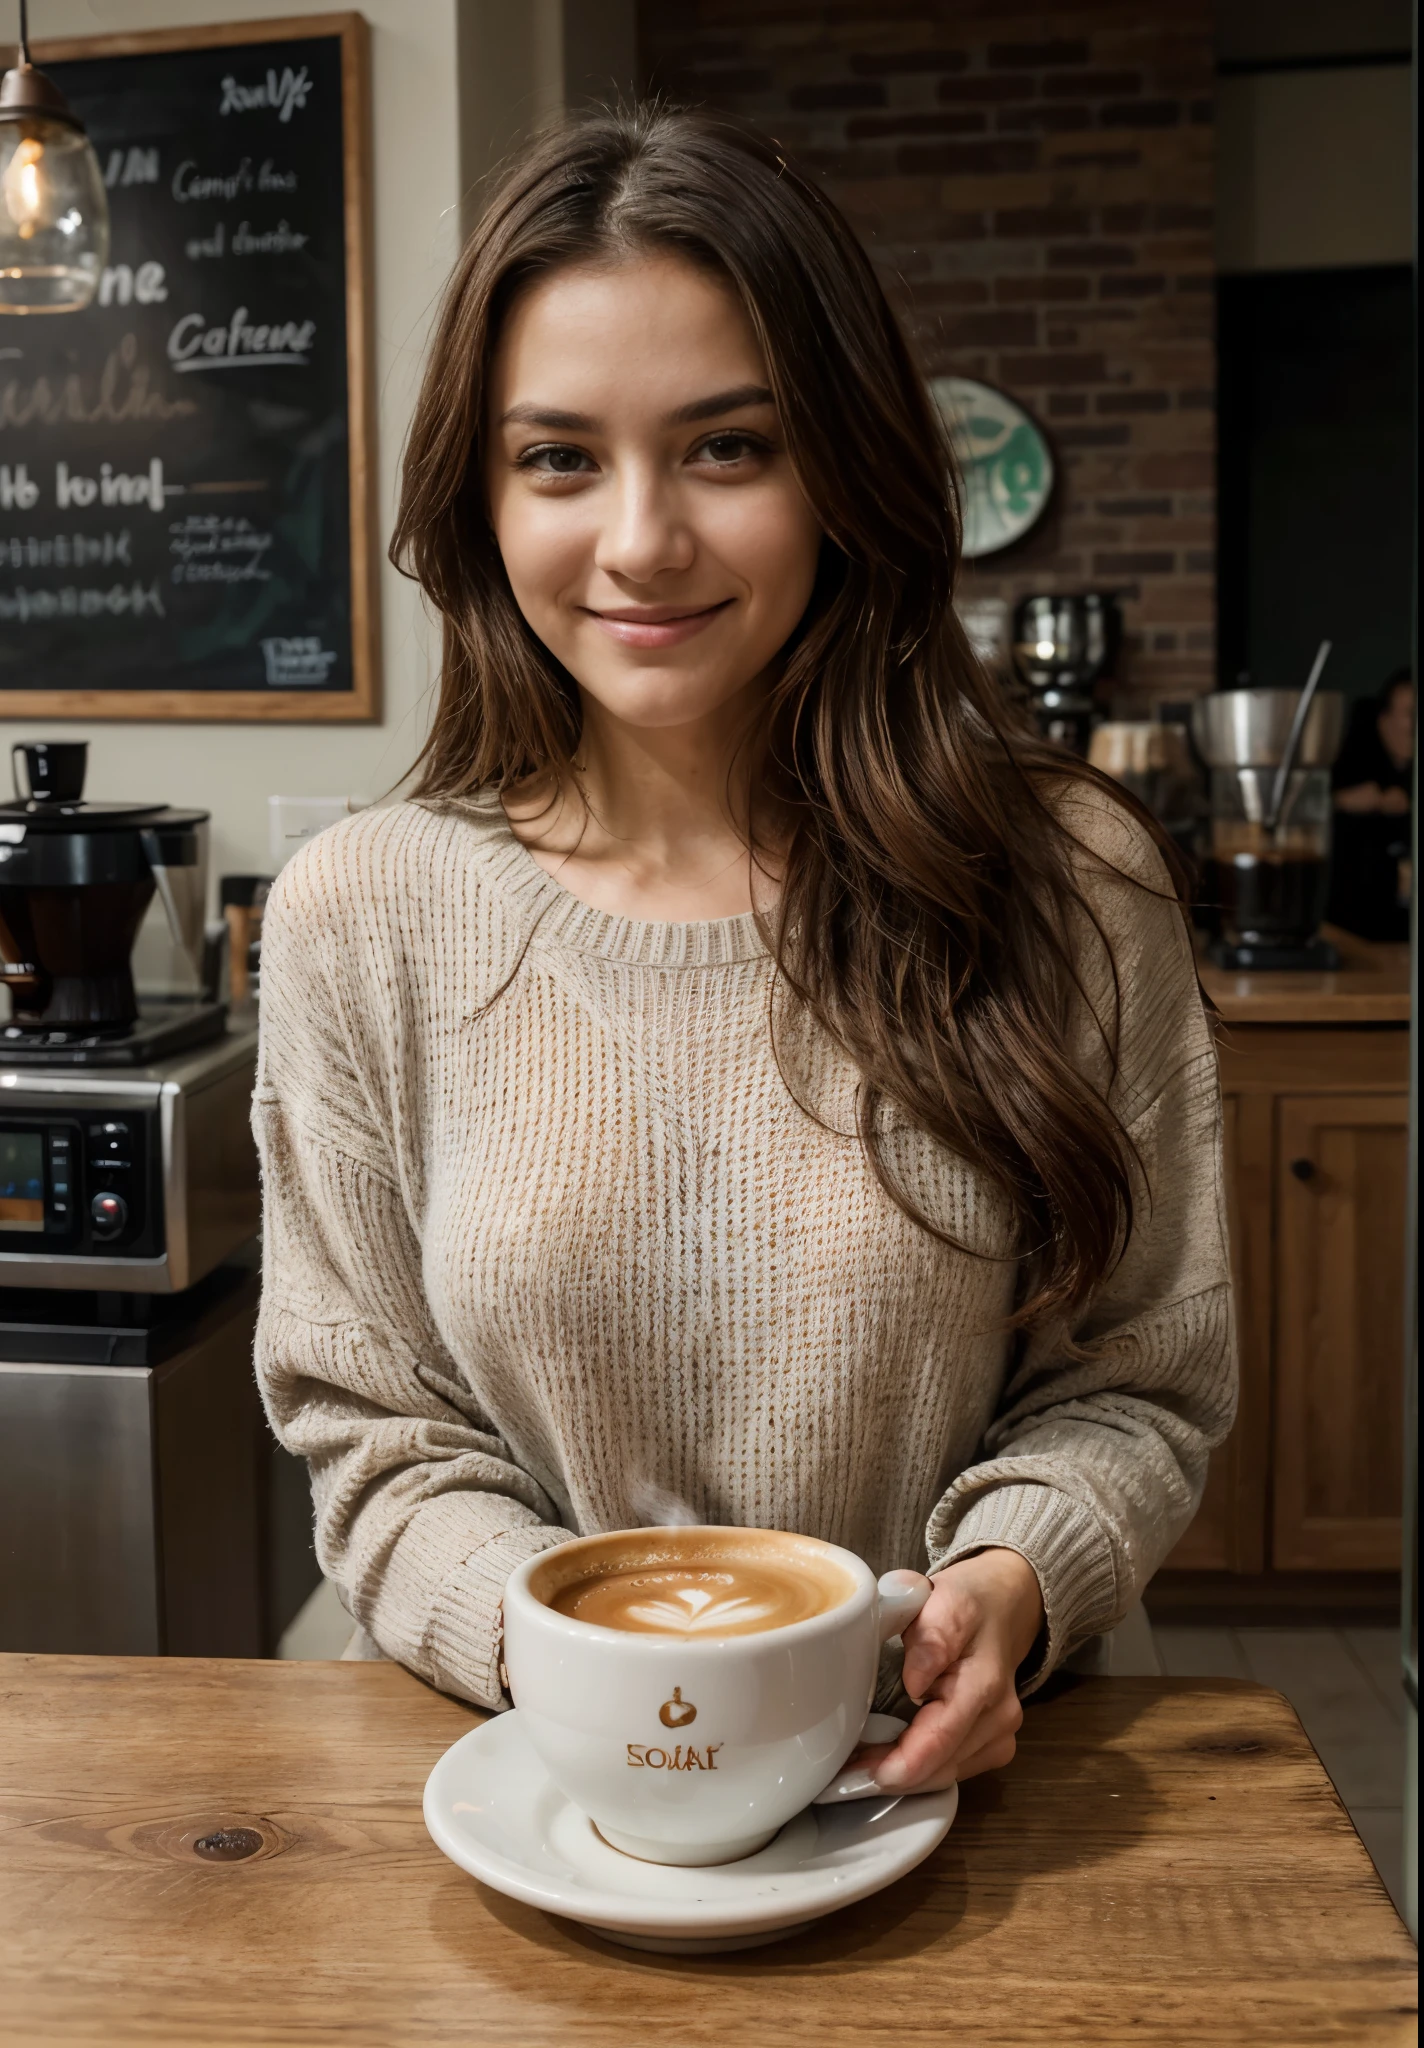 best quality,4k,8k,highres,masterpiece:1.2),ultra-detailed,(realistic,photorealistic,photo-realistic:1.37),beautiful woman, 30 years old,smiling woman,long,wavy,dark brown hair,dark brown eyes,happy expression,detailed hair strands,happiness,relaxing atmosphere,upscale coffee shop,dressed in jeans,stylish and modern outfit,comfortable seating area,wooden furniture,cozy ambient lighting,large glass windows,people enjoying their coffee,different coffee brewing equipment,high quality coffee beans,rich aroma,freshly ground coffee beans,delicate foam on the coffee cup,steaming hot coffee,takeout cups,csoft background music,vibrant and energetic atmosphere,warm color palette,neutral colors with pops of earth tones,warm and soft lighting,stylish decor elements,artistic wall paintings,beautifully designed menu board,hanging plants from the ceiling,bright and clean space,to-go pastry options,indulgent treats,detailed coffee cup designs,reflections on the coffee cups,friendly and attentive customer service,inviting and welcoming environment,classy and upscale coffee experience, best quality, UHD, high details, best quality, beautiful face, long oval face, deep cahrming look, deep eyes, cinematic lighting, motion blur, film grain, very detailed, 30 years, natural wave hair, dark brown eyes, high-res, masterpiece, best quality, intricate details, highly detailed, sharp focus, detailed skin, realistic skin texture, texture, detailed eyes, professional, 4k, 85mm, shallow depth of field, kodak color vision, perfect fit body, extremely detailed, photo_\(ultra\), photorealistic, realistic, post-processing, maximum detail, roughness, real life, ultra realistic, photorealism, photography, 8k uhd, photography (grain of film) medium shot for closeup shot, longer slimer face, perfect face, MIDDLE SIZE BREAST under the clothes, sporty slim body, HANDS ARE HIDDEN FROM THE IMAGE, long charming face, long oval face, deep charming eyes, wearing luxury sweater 